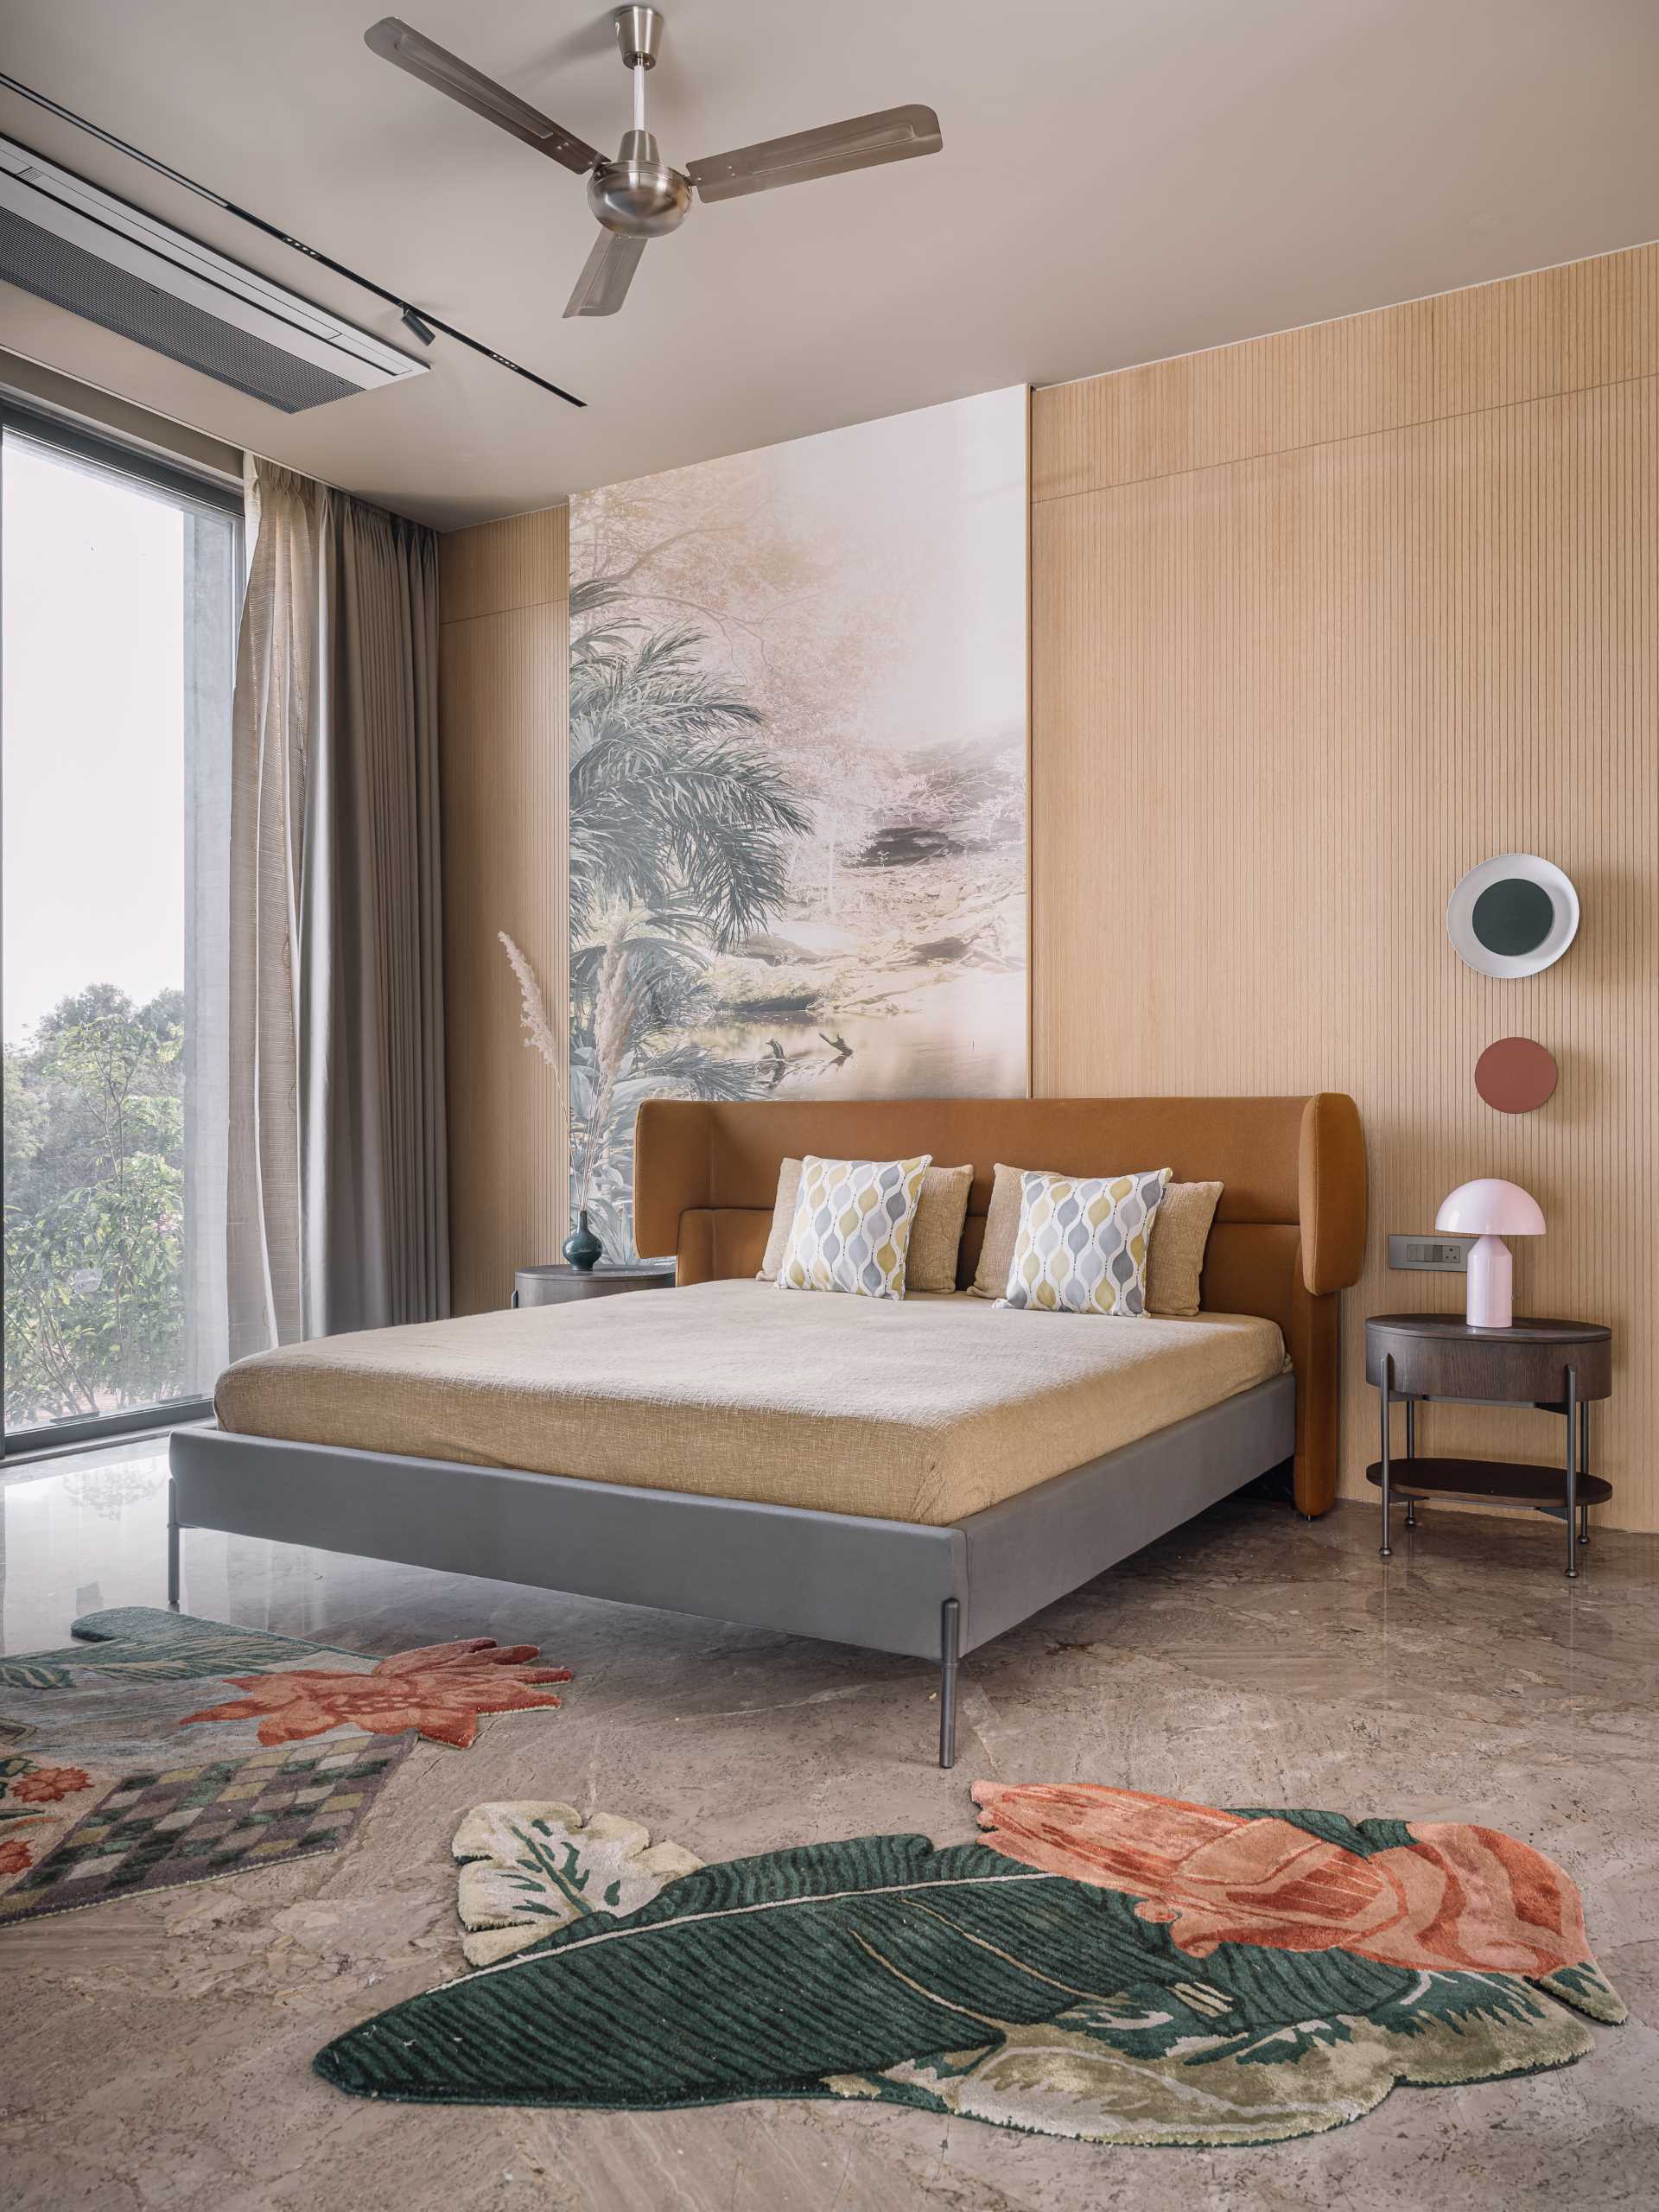 A modern bedroom with high ceilings and artwork.